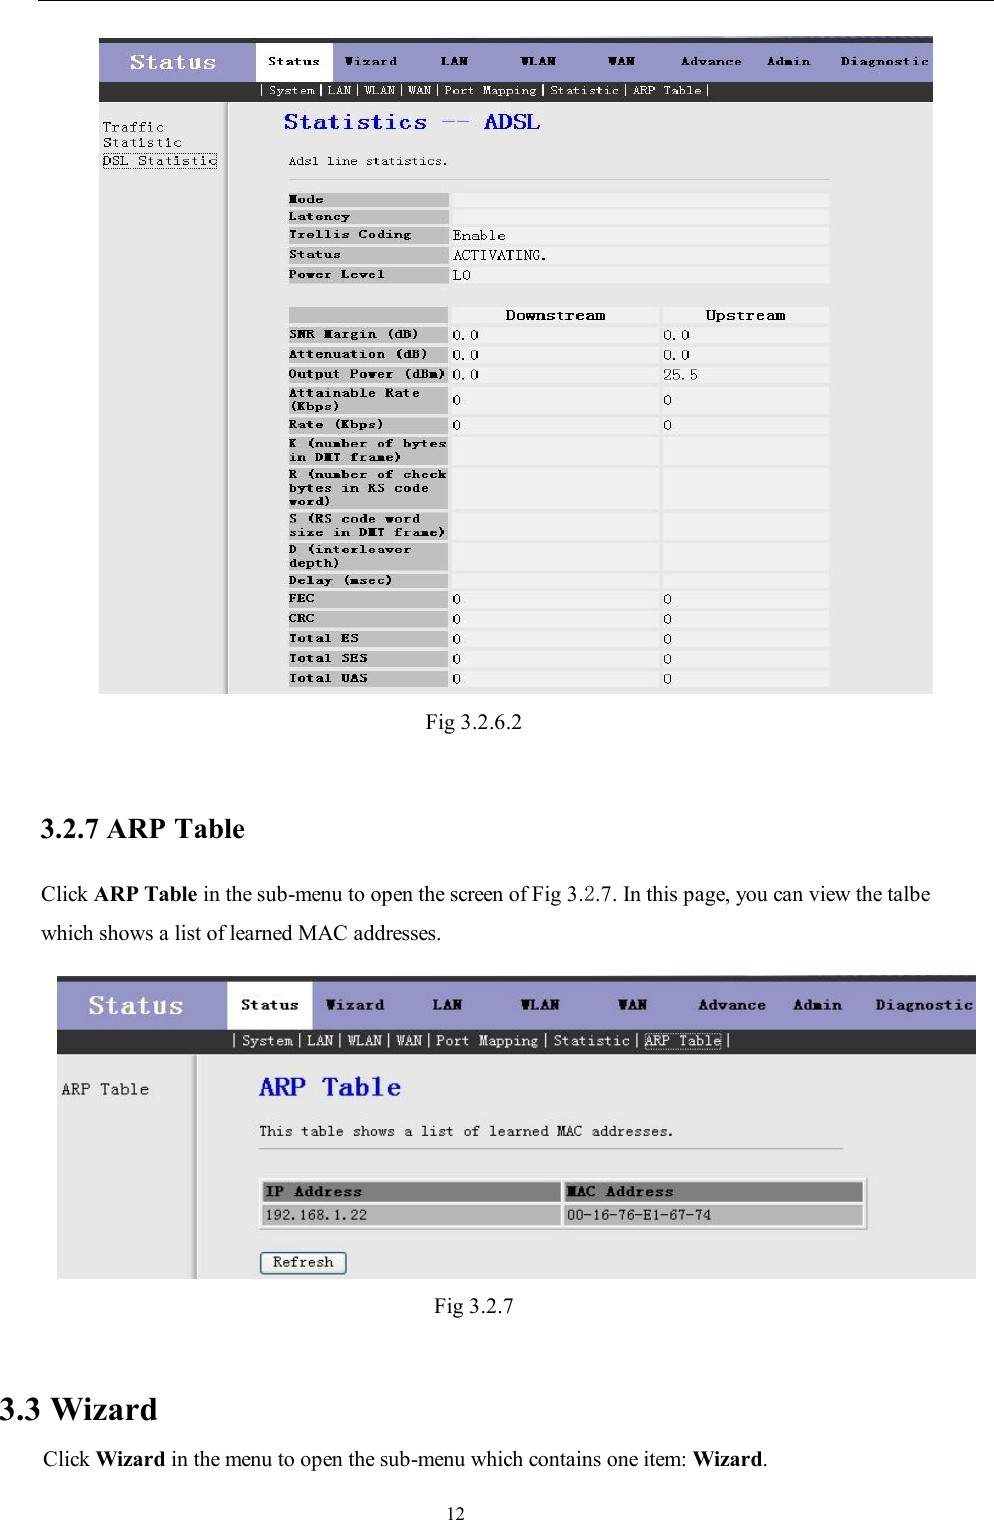                                                                     12  Fig 3.2.6.2  3.2.7 ARP Table Click ARP Table in the sub-menu to open the screen of Fig 3.2.7. In this page, you can view the talbe which shows a list of learned MAC addresses.  Fig 3.2.7  3.3 Wizard Click Wizard in the menu to open the sub-menu which contains one item: Wizard. 